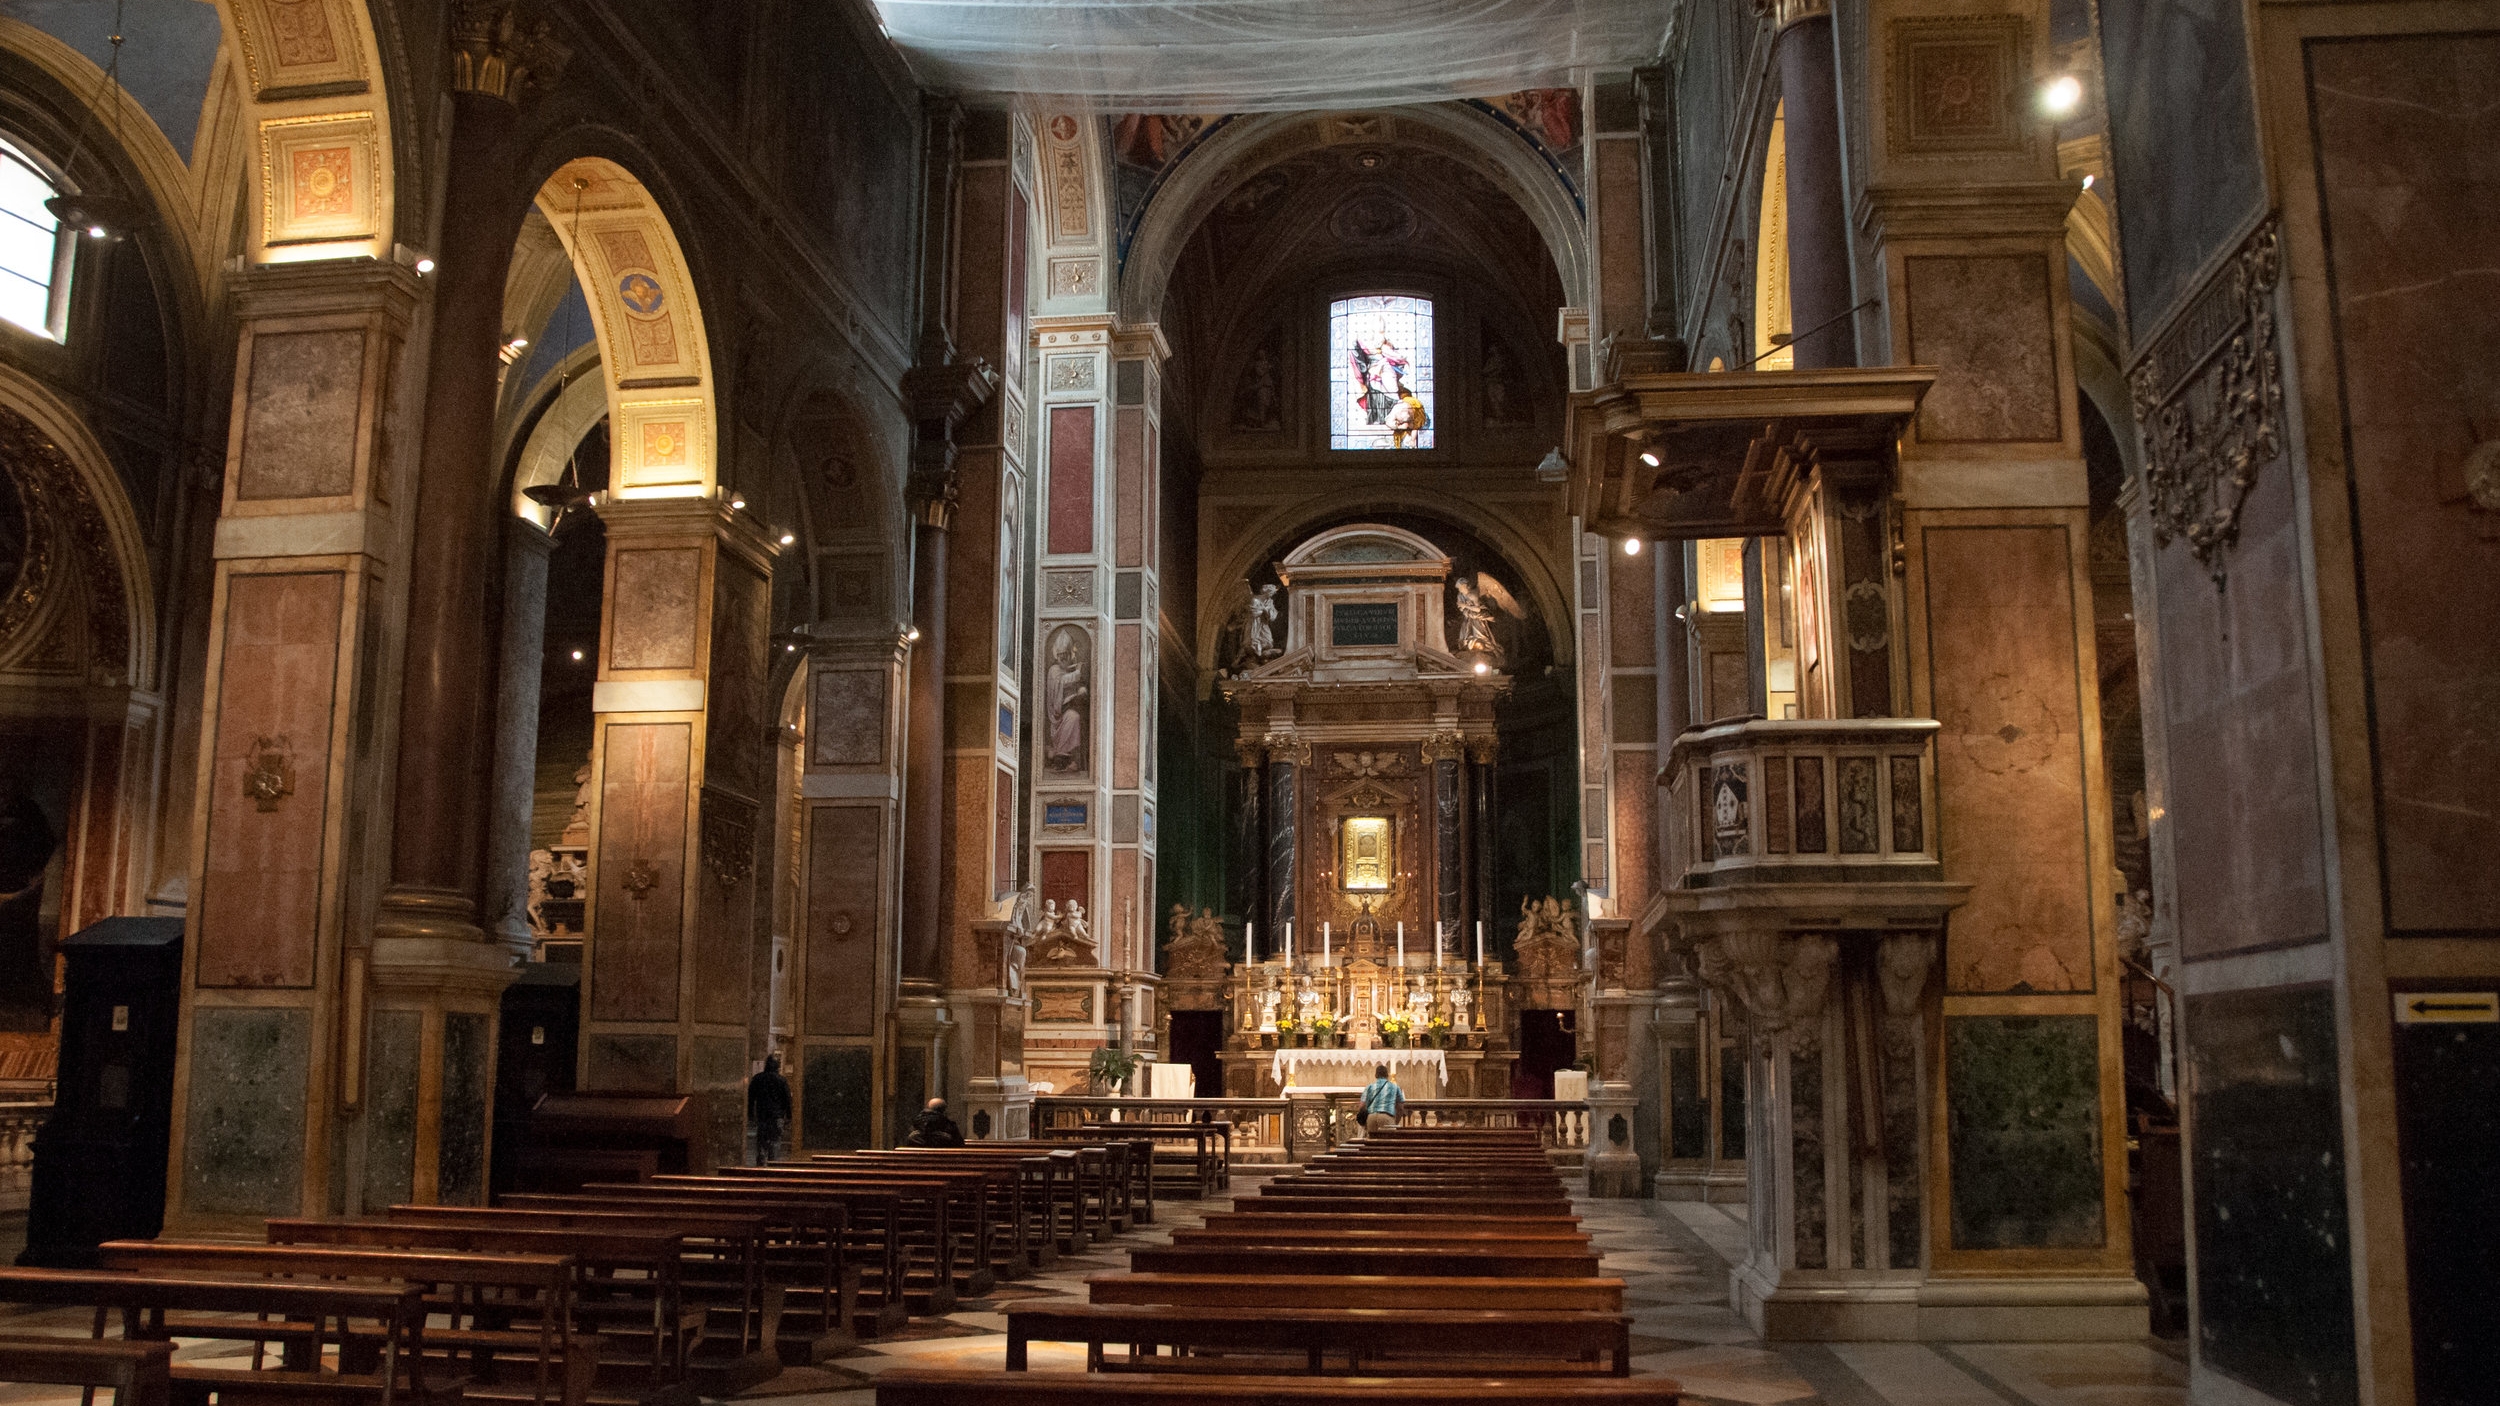 Main Altar at the Basilica of Saint Augustine, Rome. Photo by Kevin Salemme